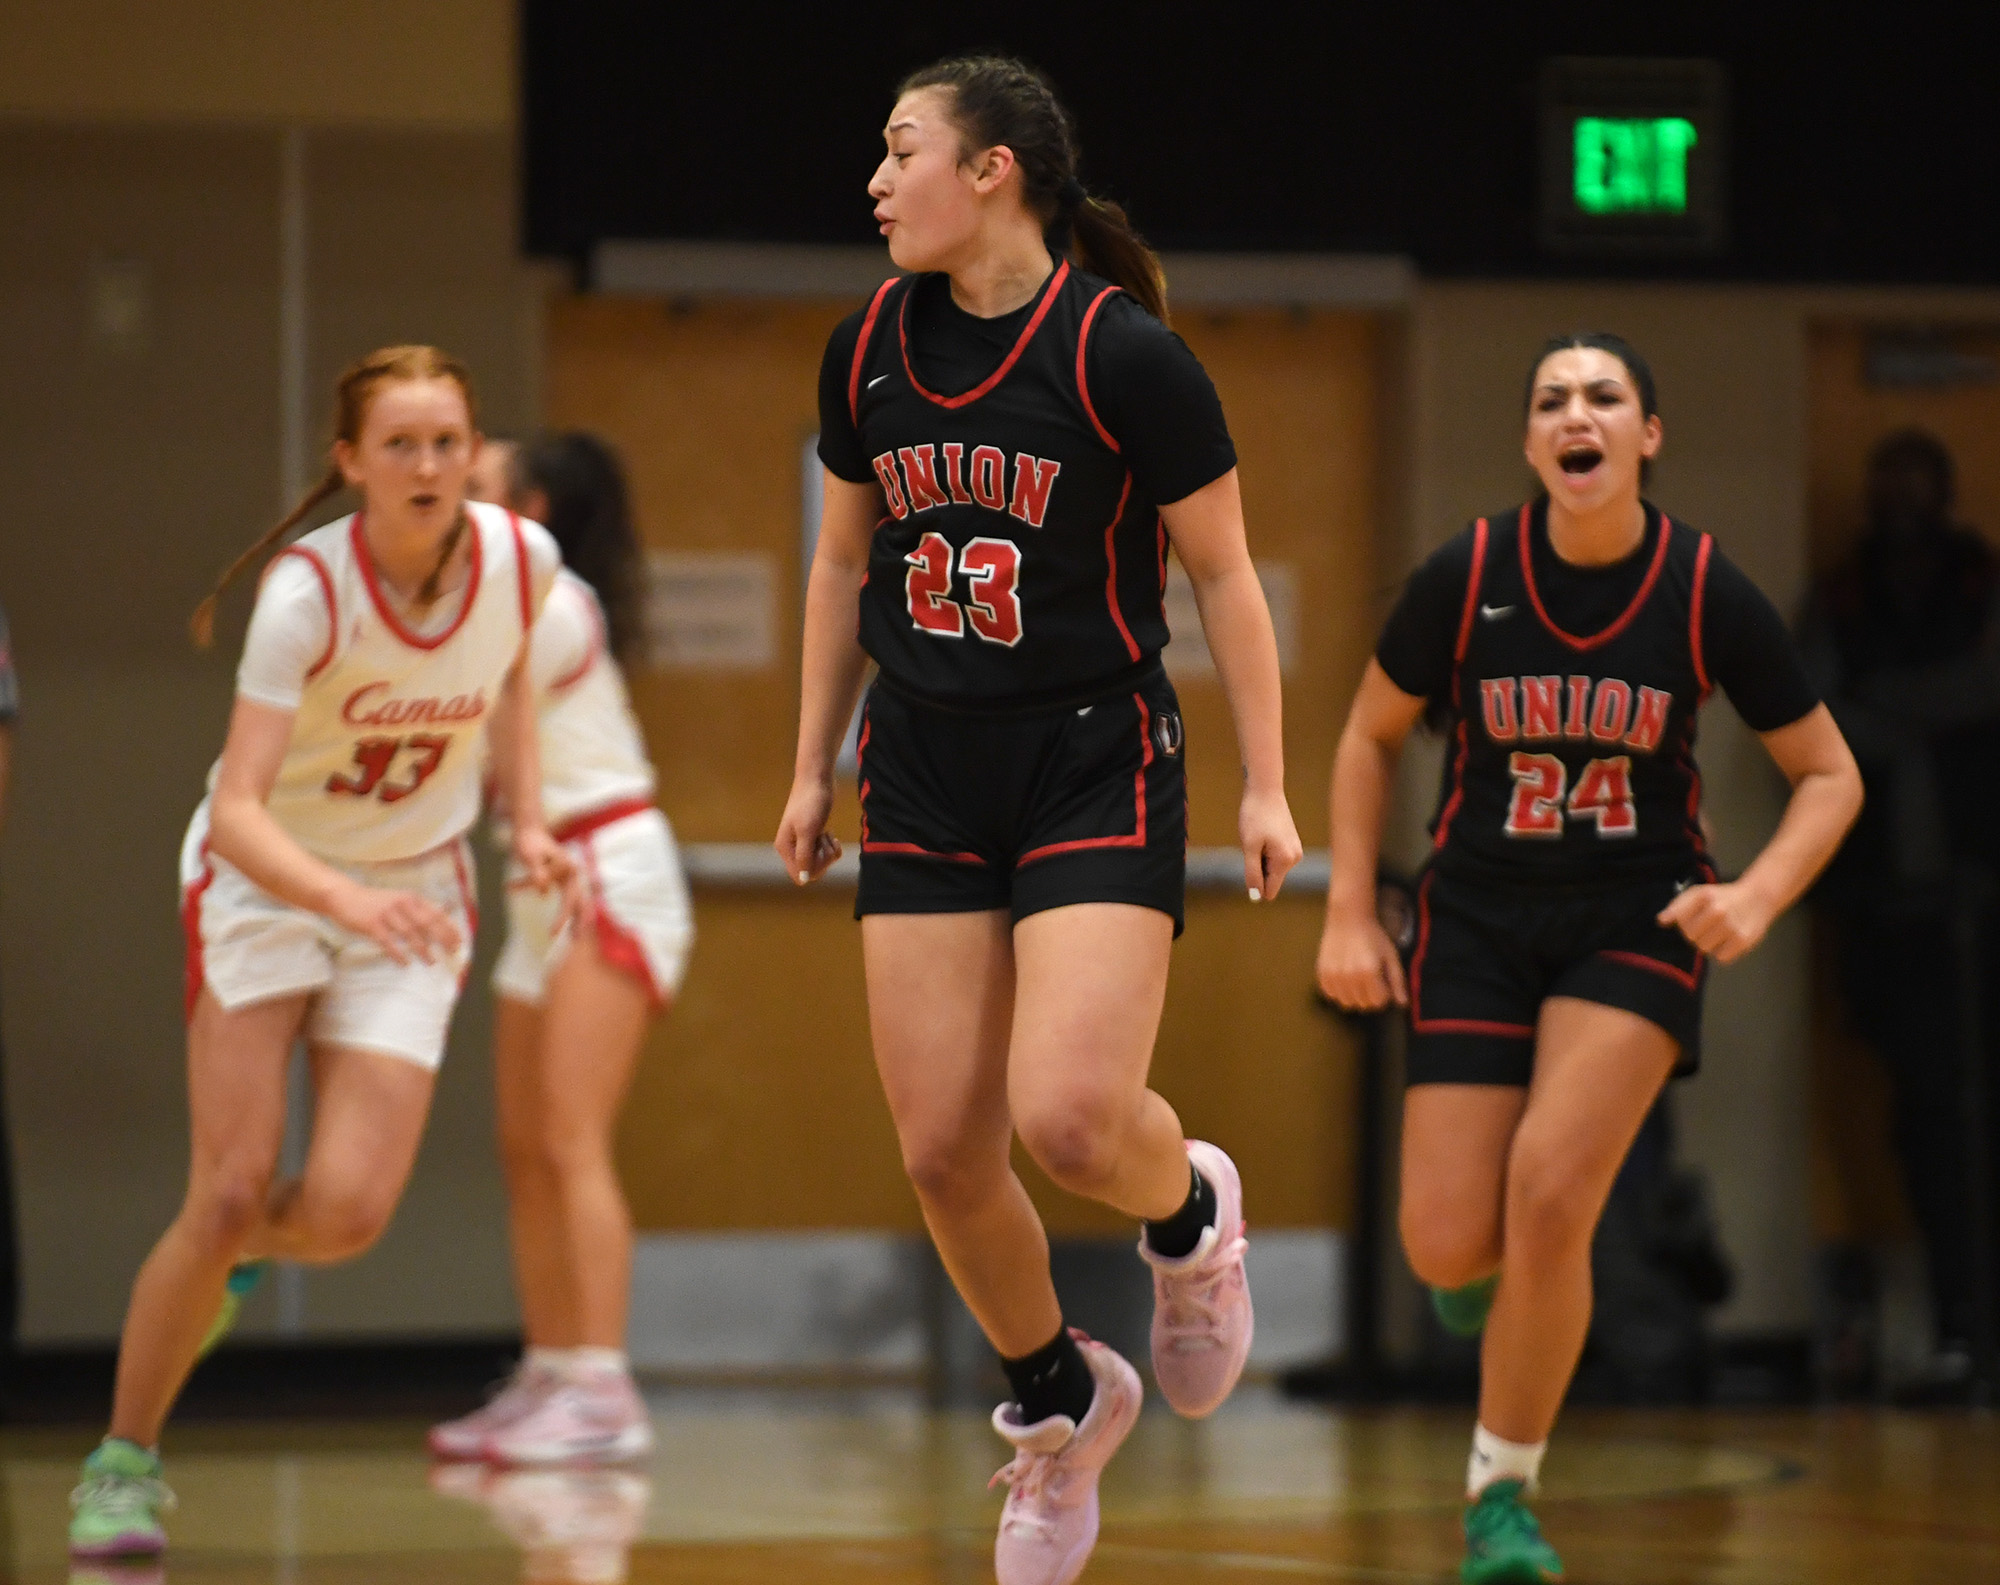 Union's Brooklynn Haywood, center, reacts after making a shot Tuesday, Jan. 3, 2023, during the Papermakers’ 63-52 win against Union at Camas High School.